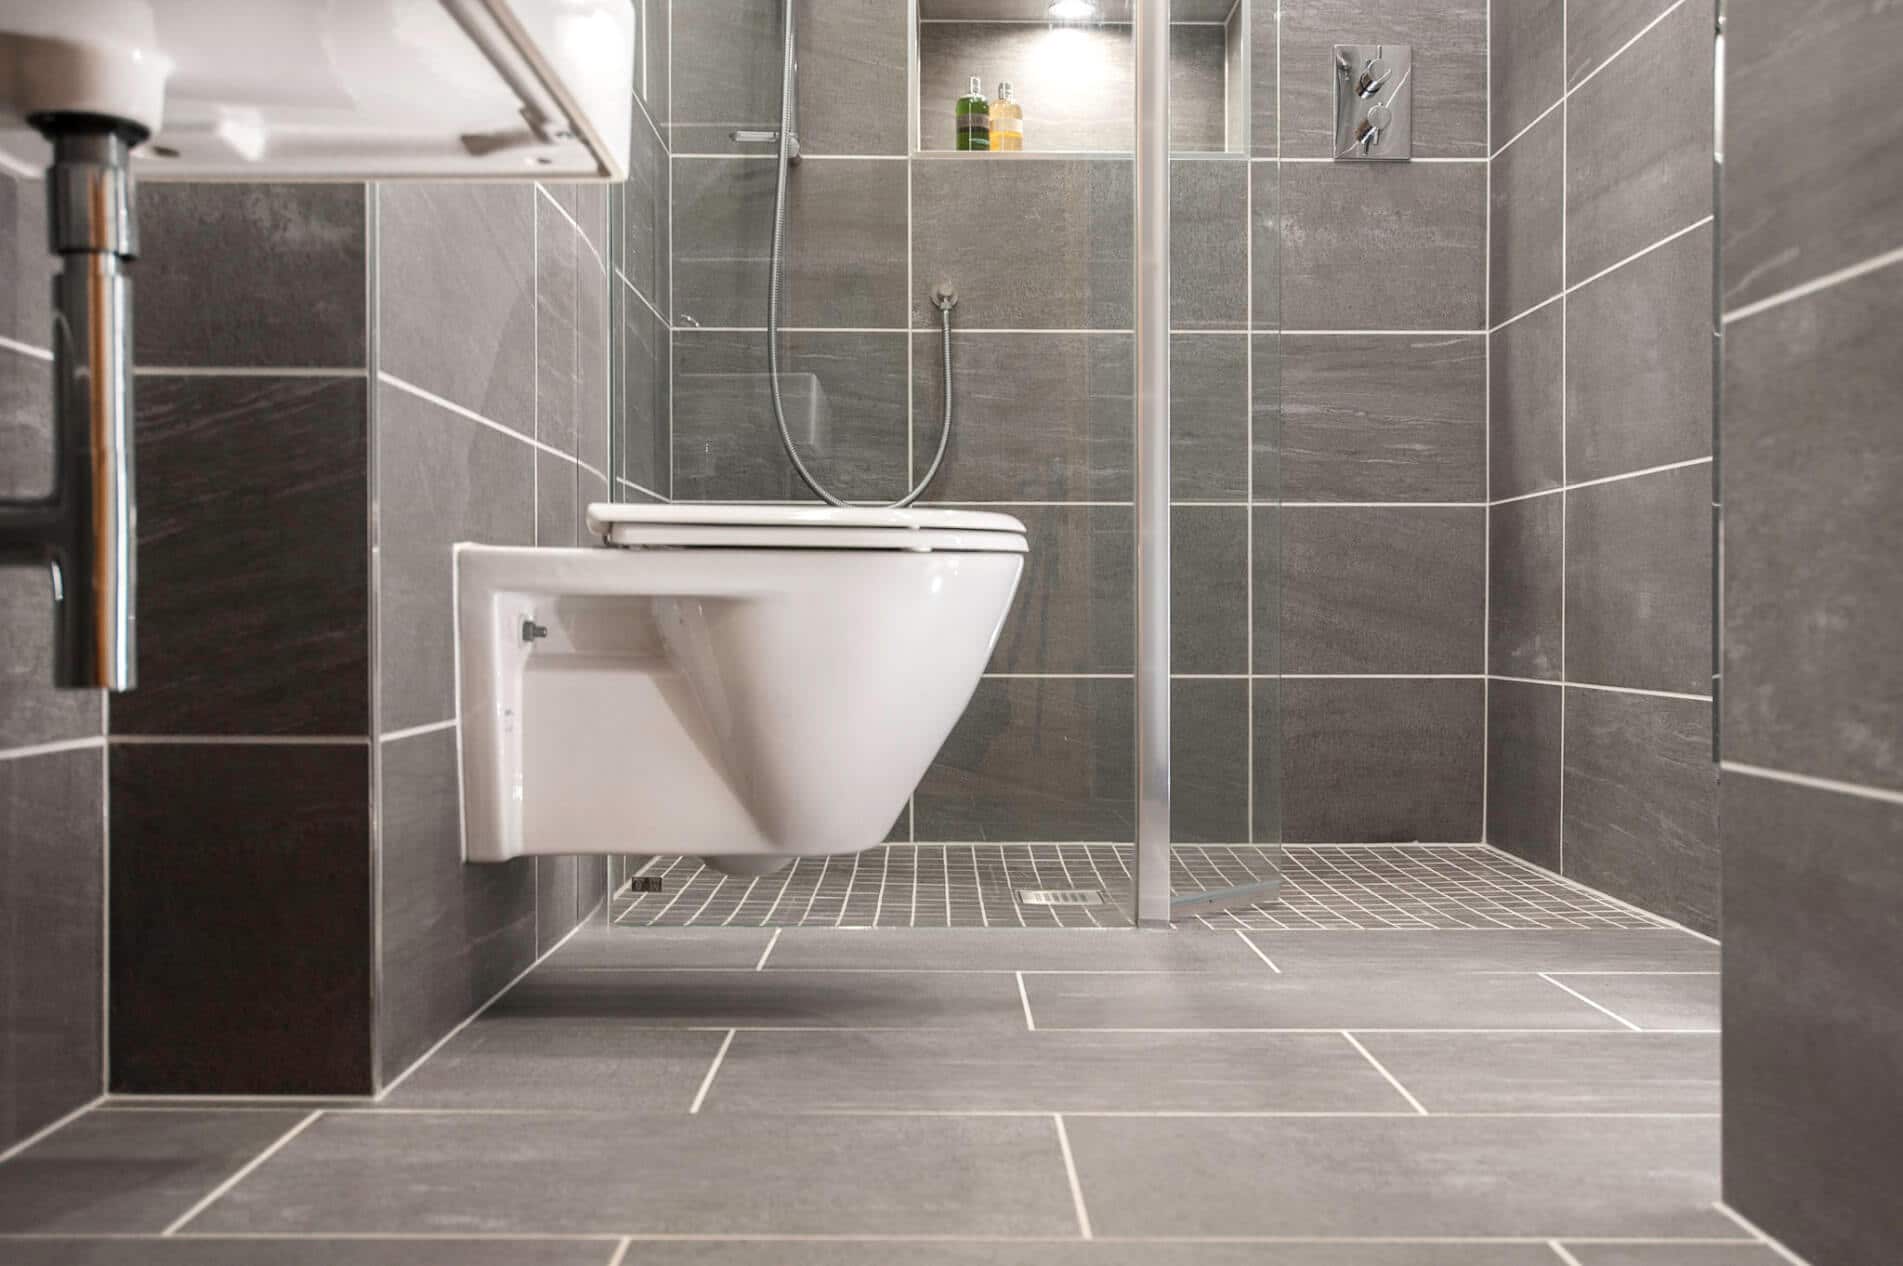 BMAS – Creating wetrooms with safety in mind